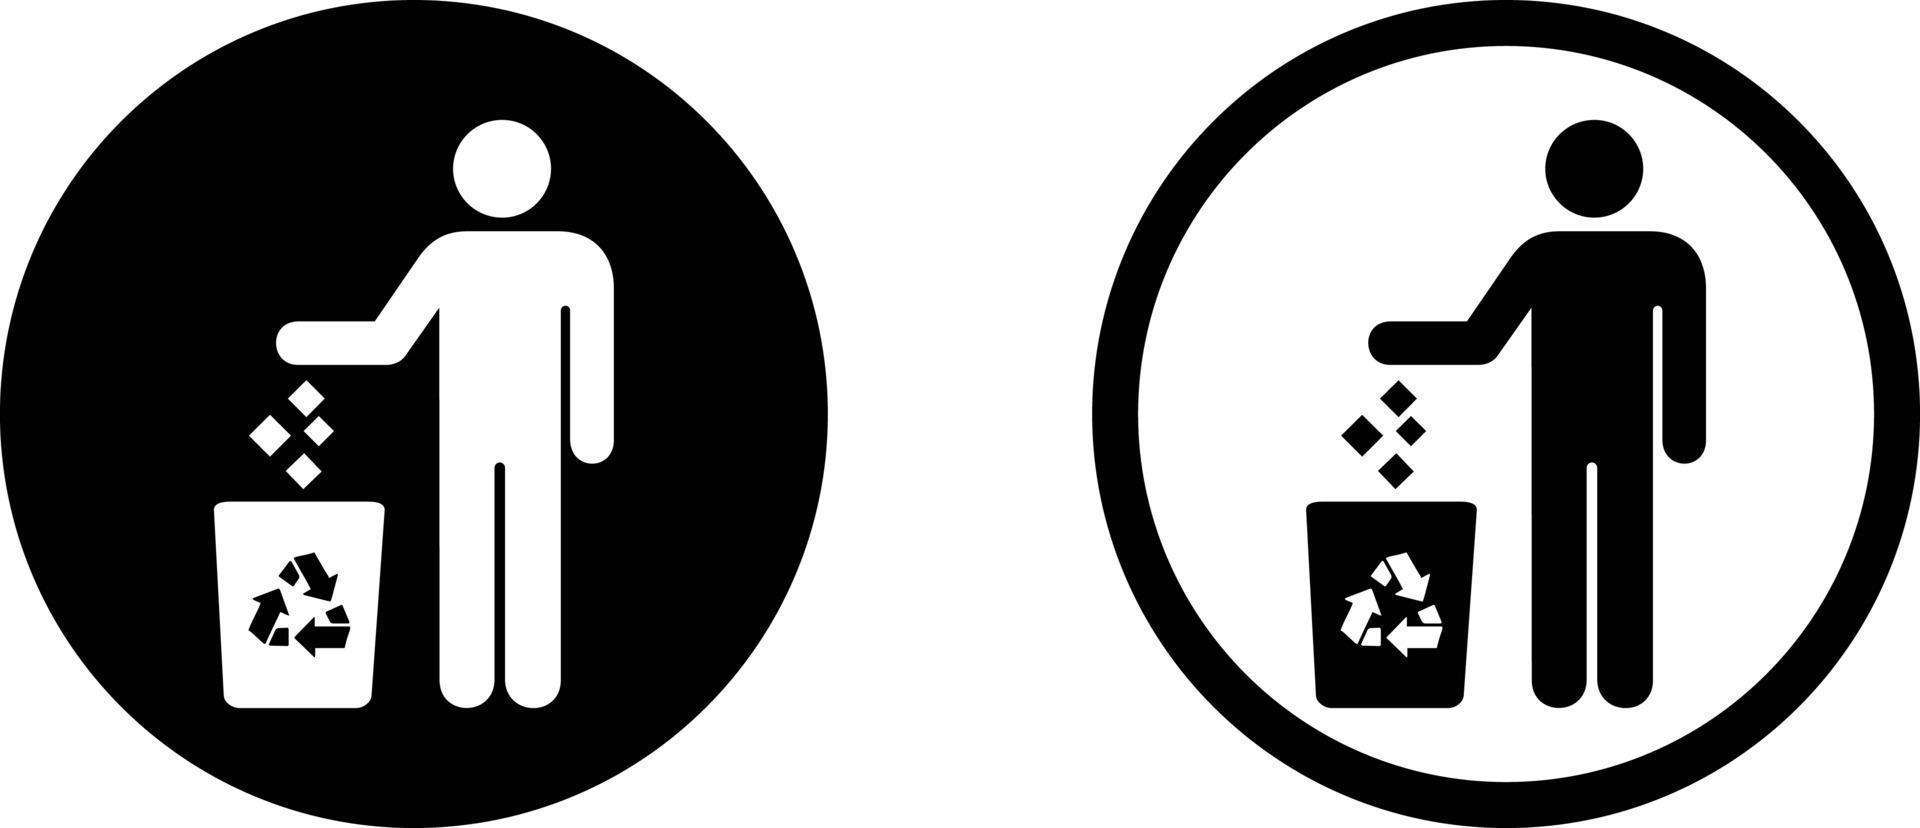 Throwing Rubbish in a Trash Can Icon Set vector